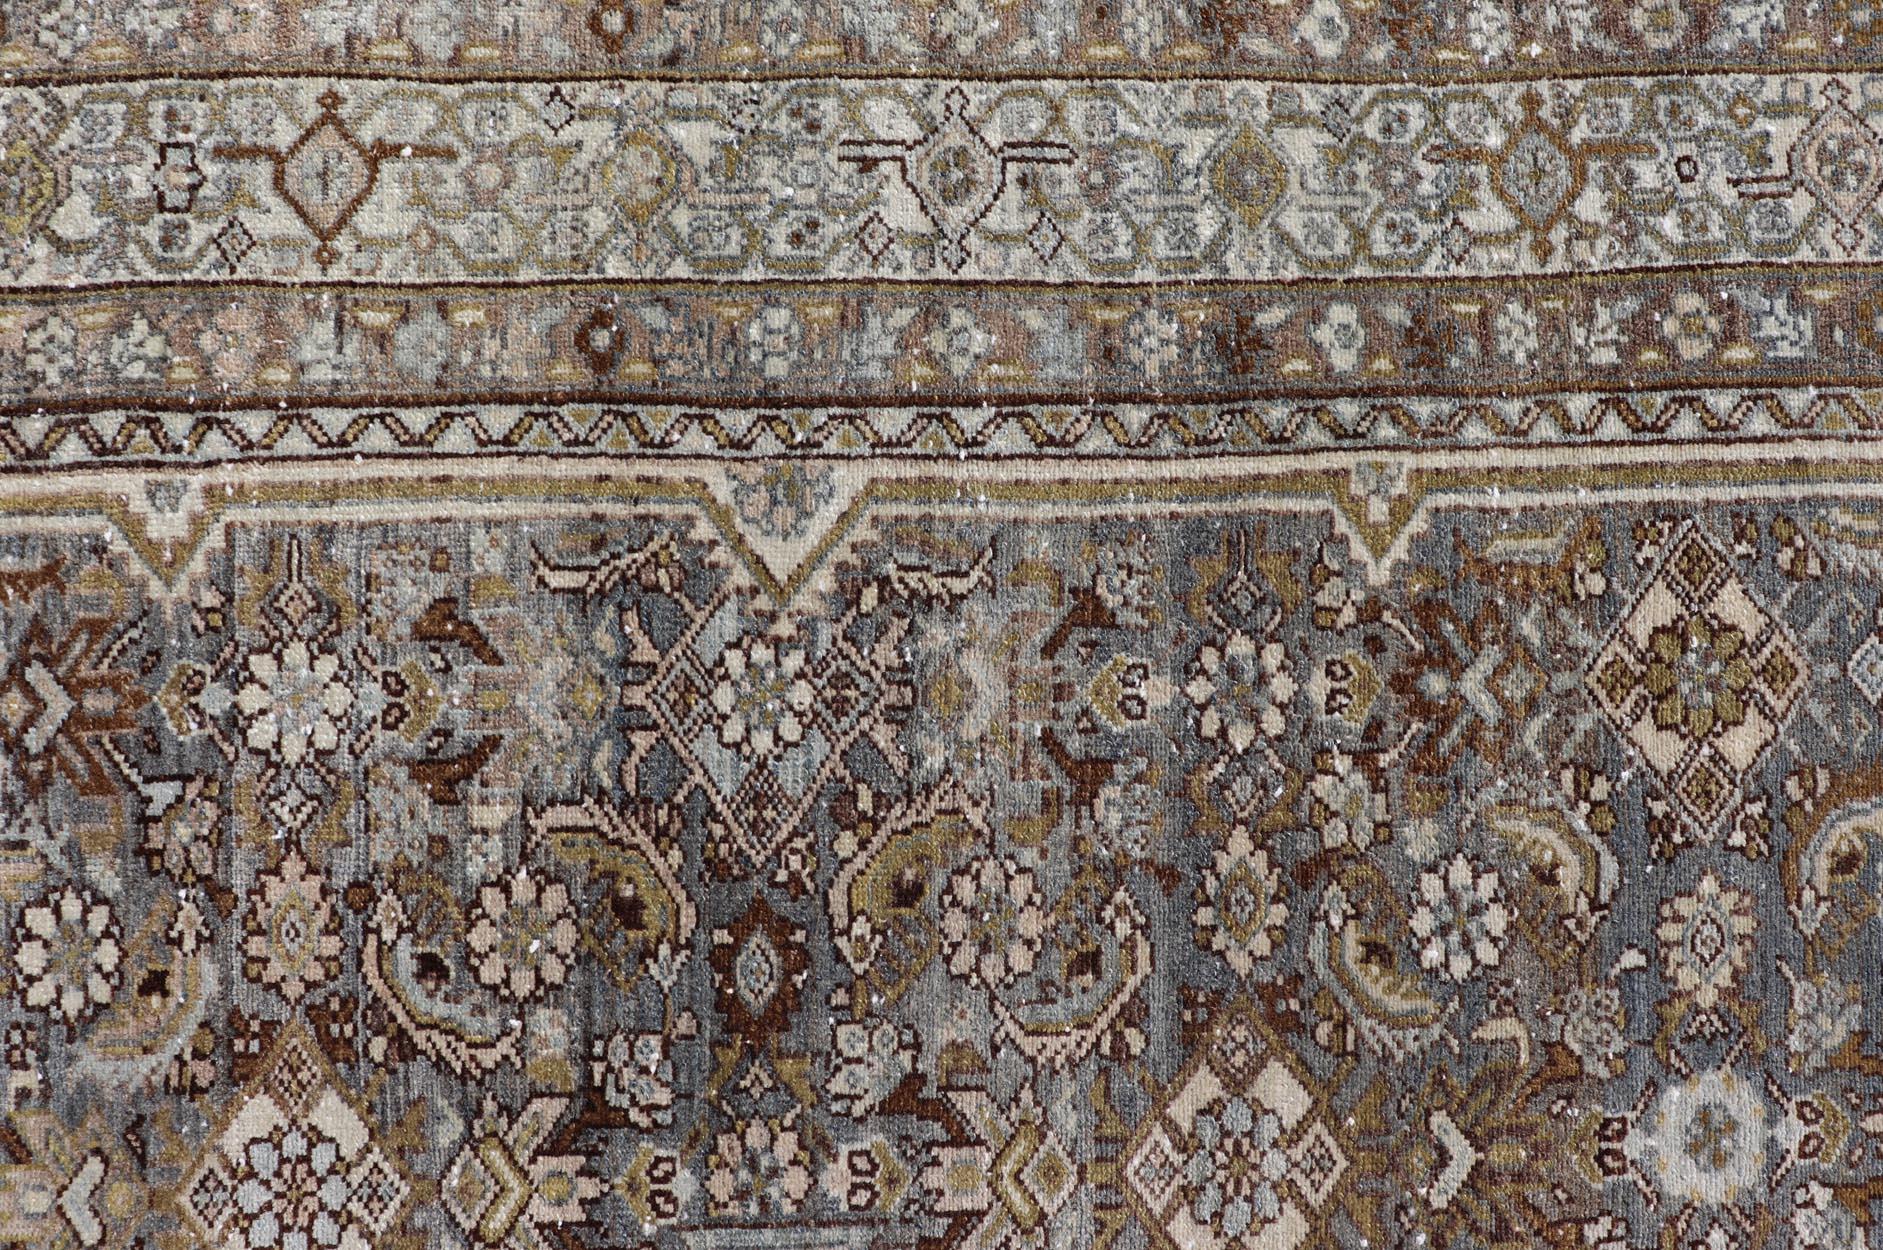 Antique Persian Bibikabad carpet with steal blue, charcoal, green, and brown. Rug W22-0108, country of origin / type: Iran / Bibikabad, circa 1920 with a rare size.

Measures: 6'2 x 9'2 

With a rare size, this antique Persian Bibikabad carpet, from